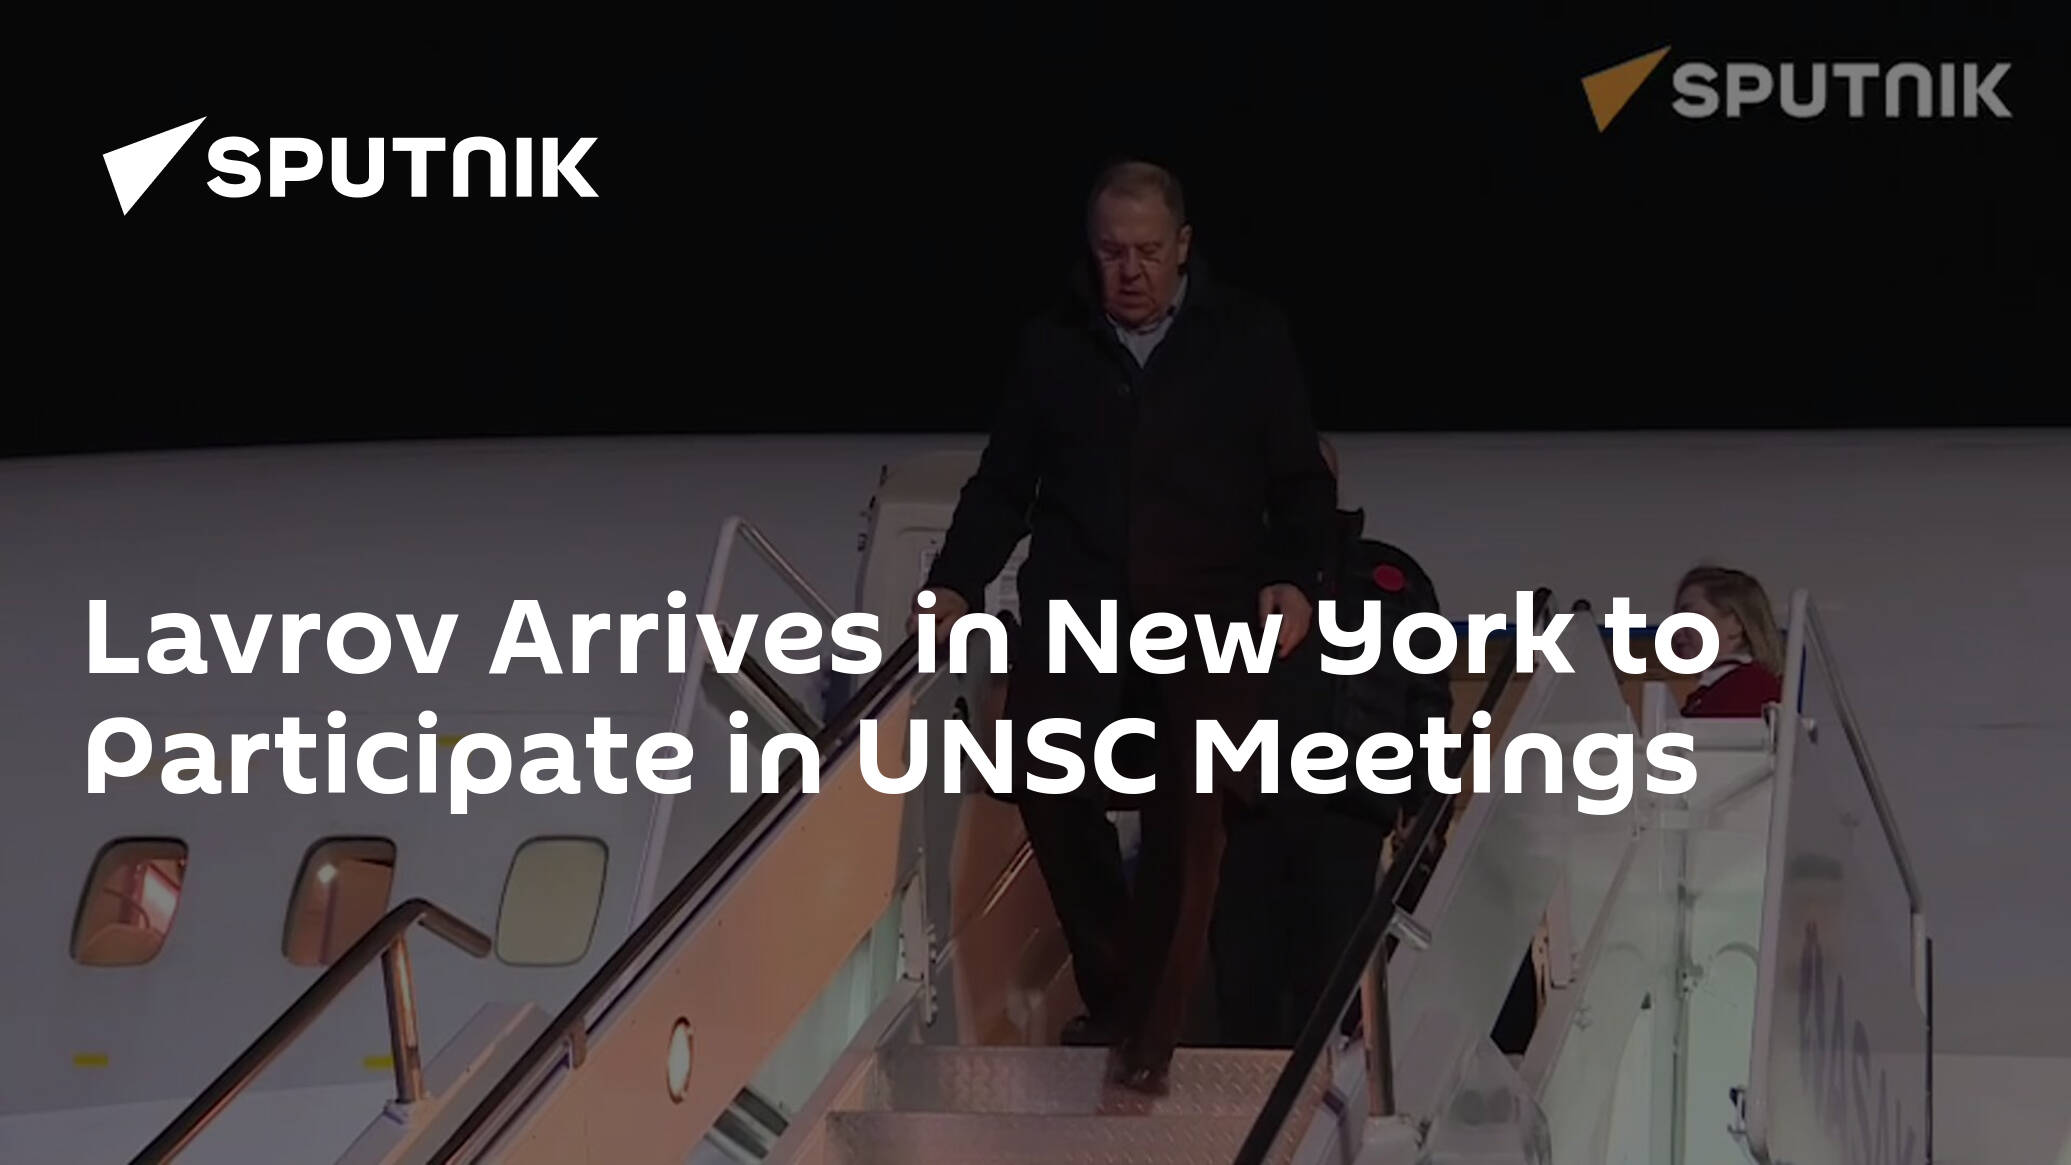 Russian FM Lavrov Arrives in New York, Will Participate in UNSC Meetings